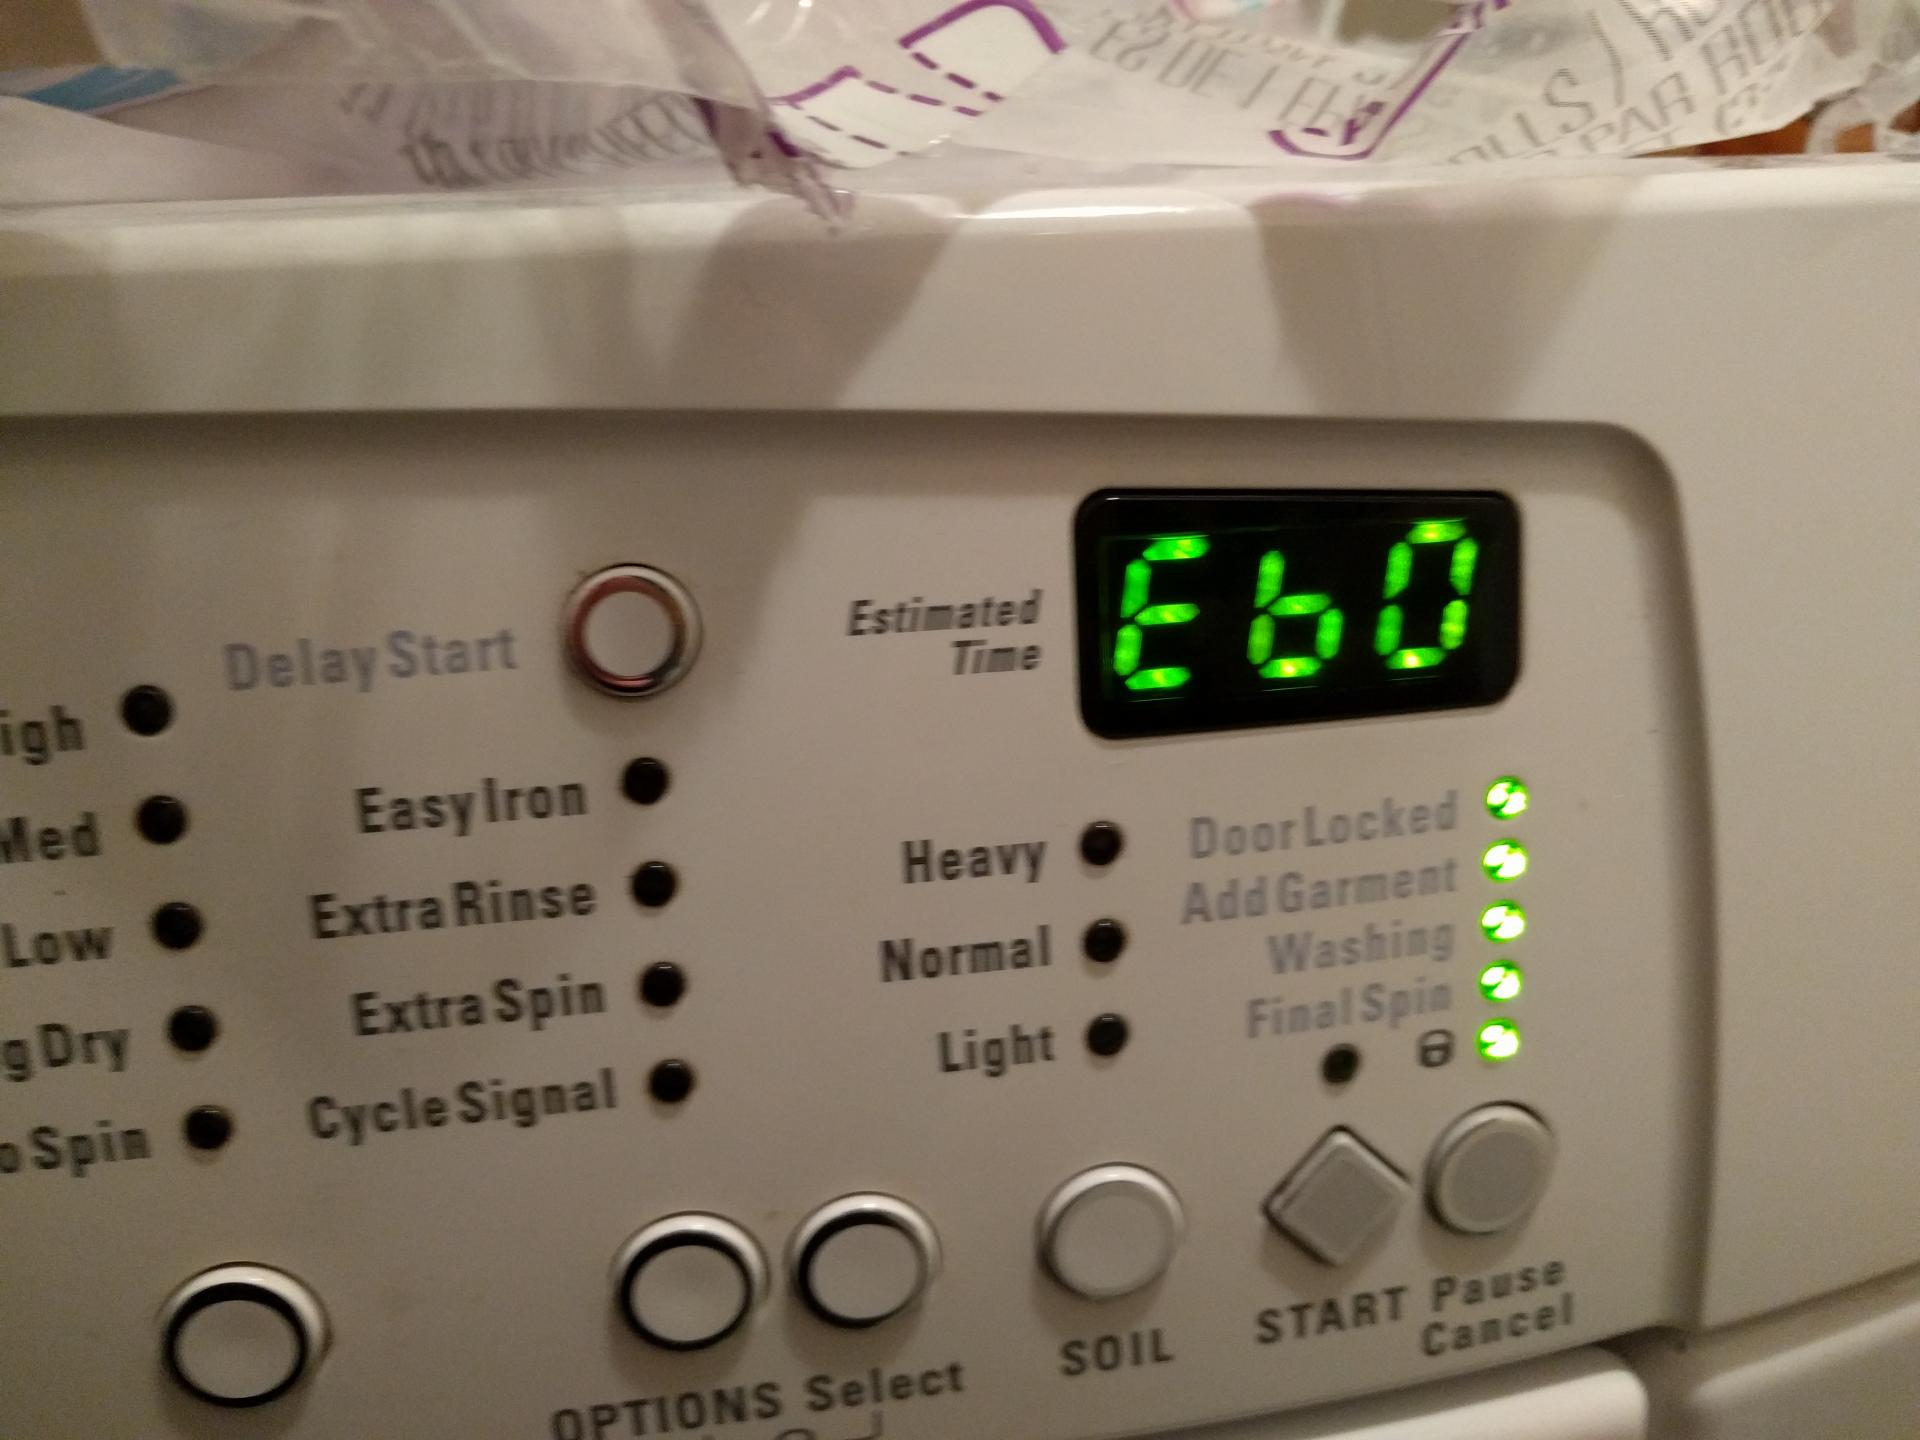 How To Fix The Error Code E60 For GE Washing Machine